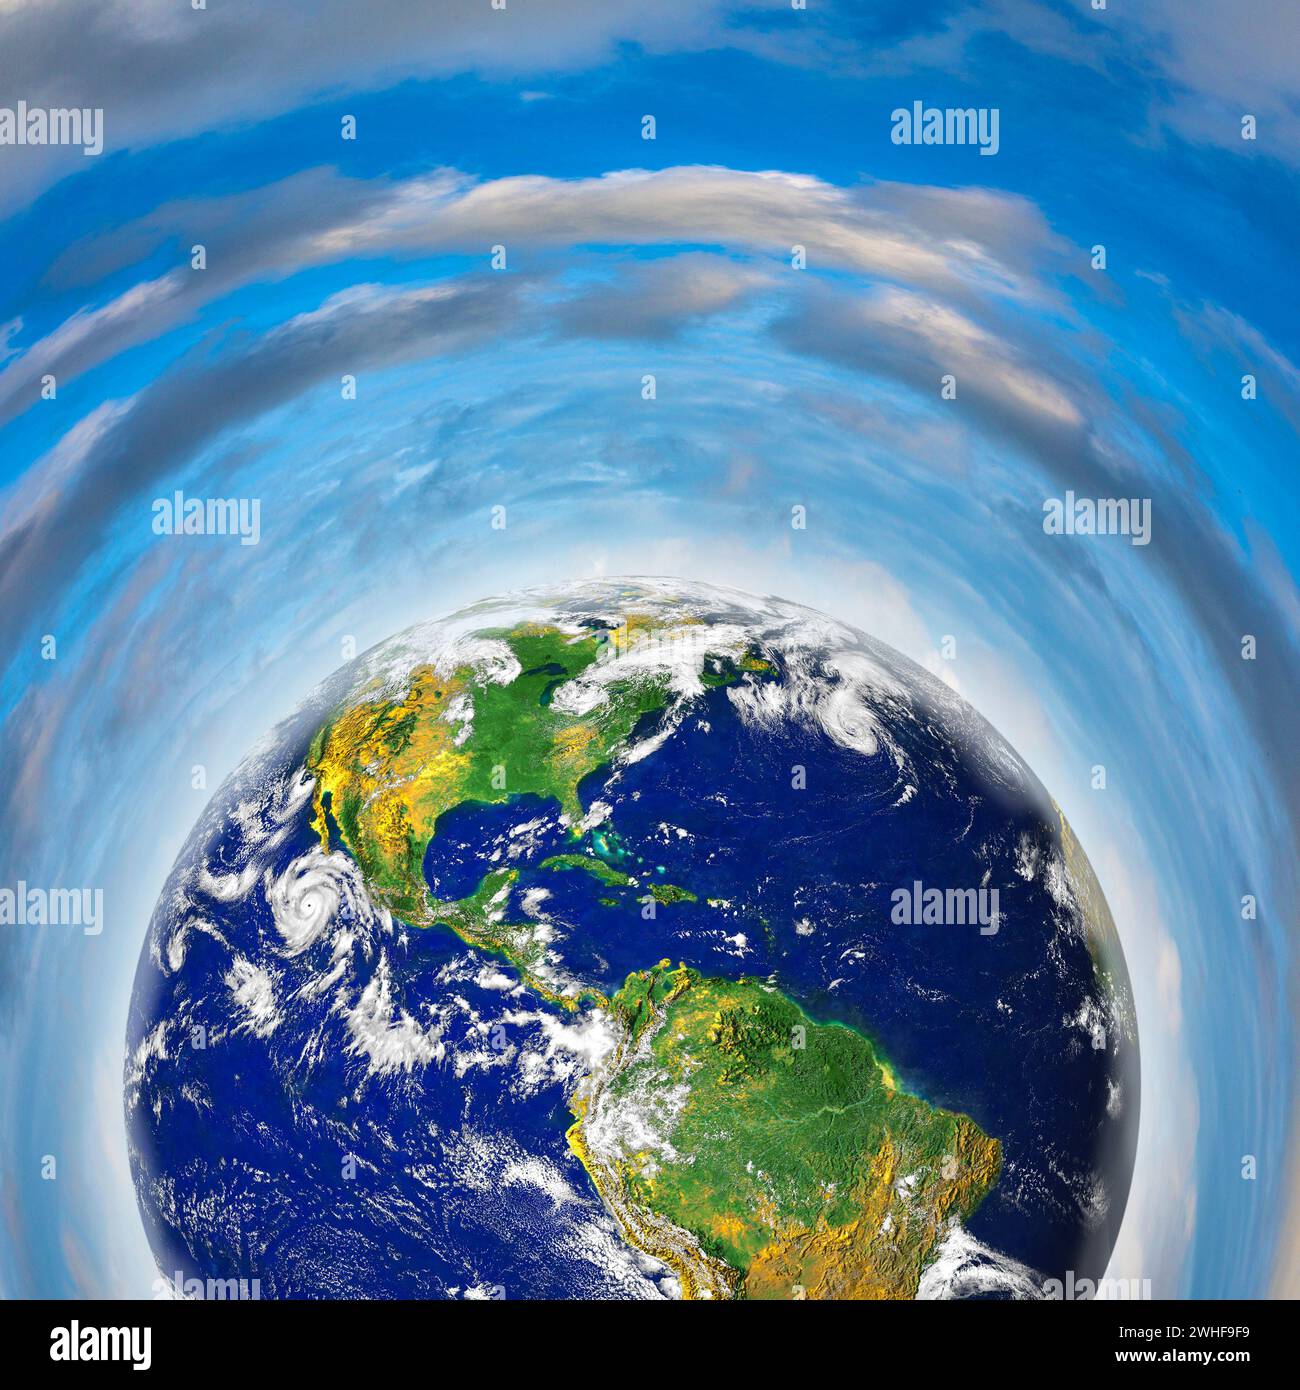 Earth's atmosphere, illustration Stock Photo